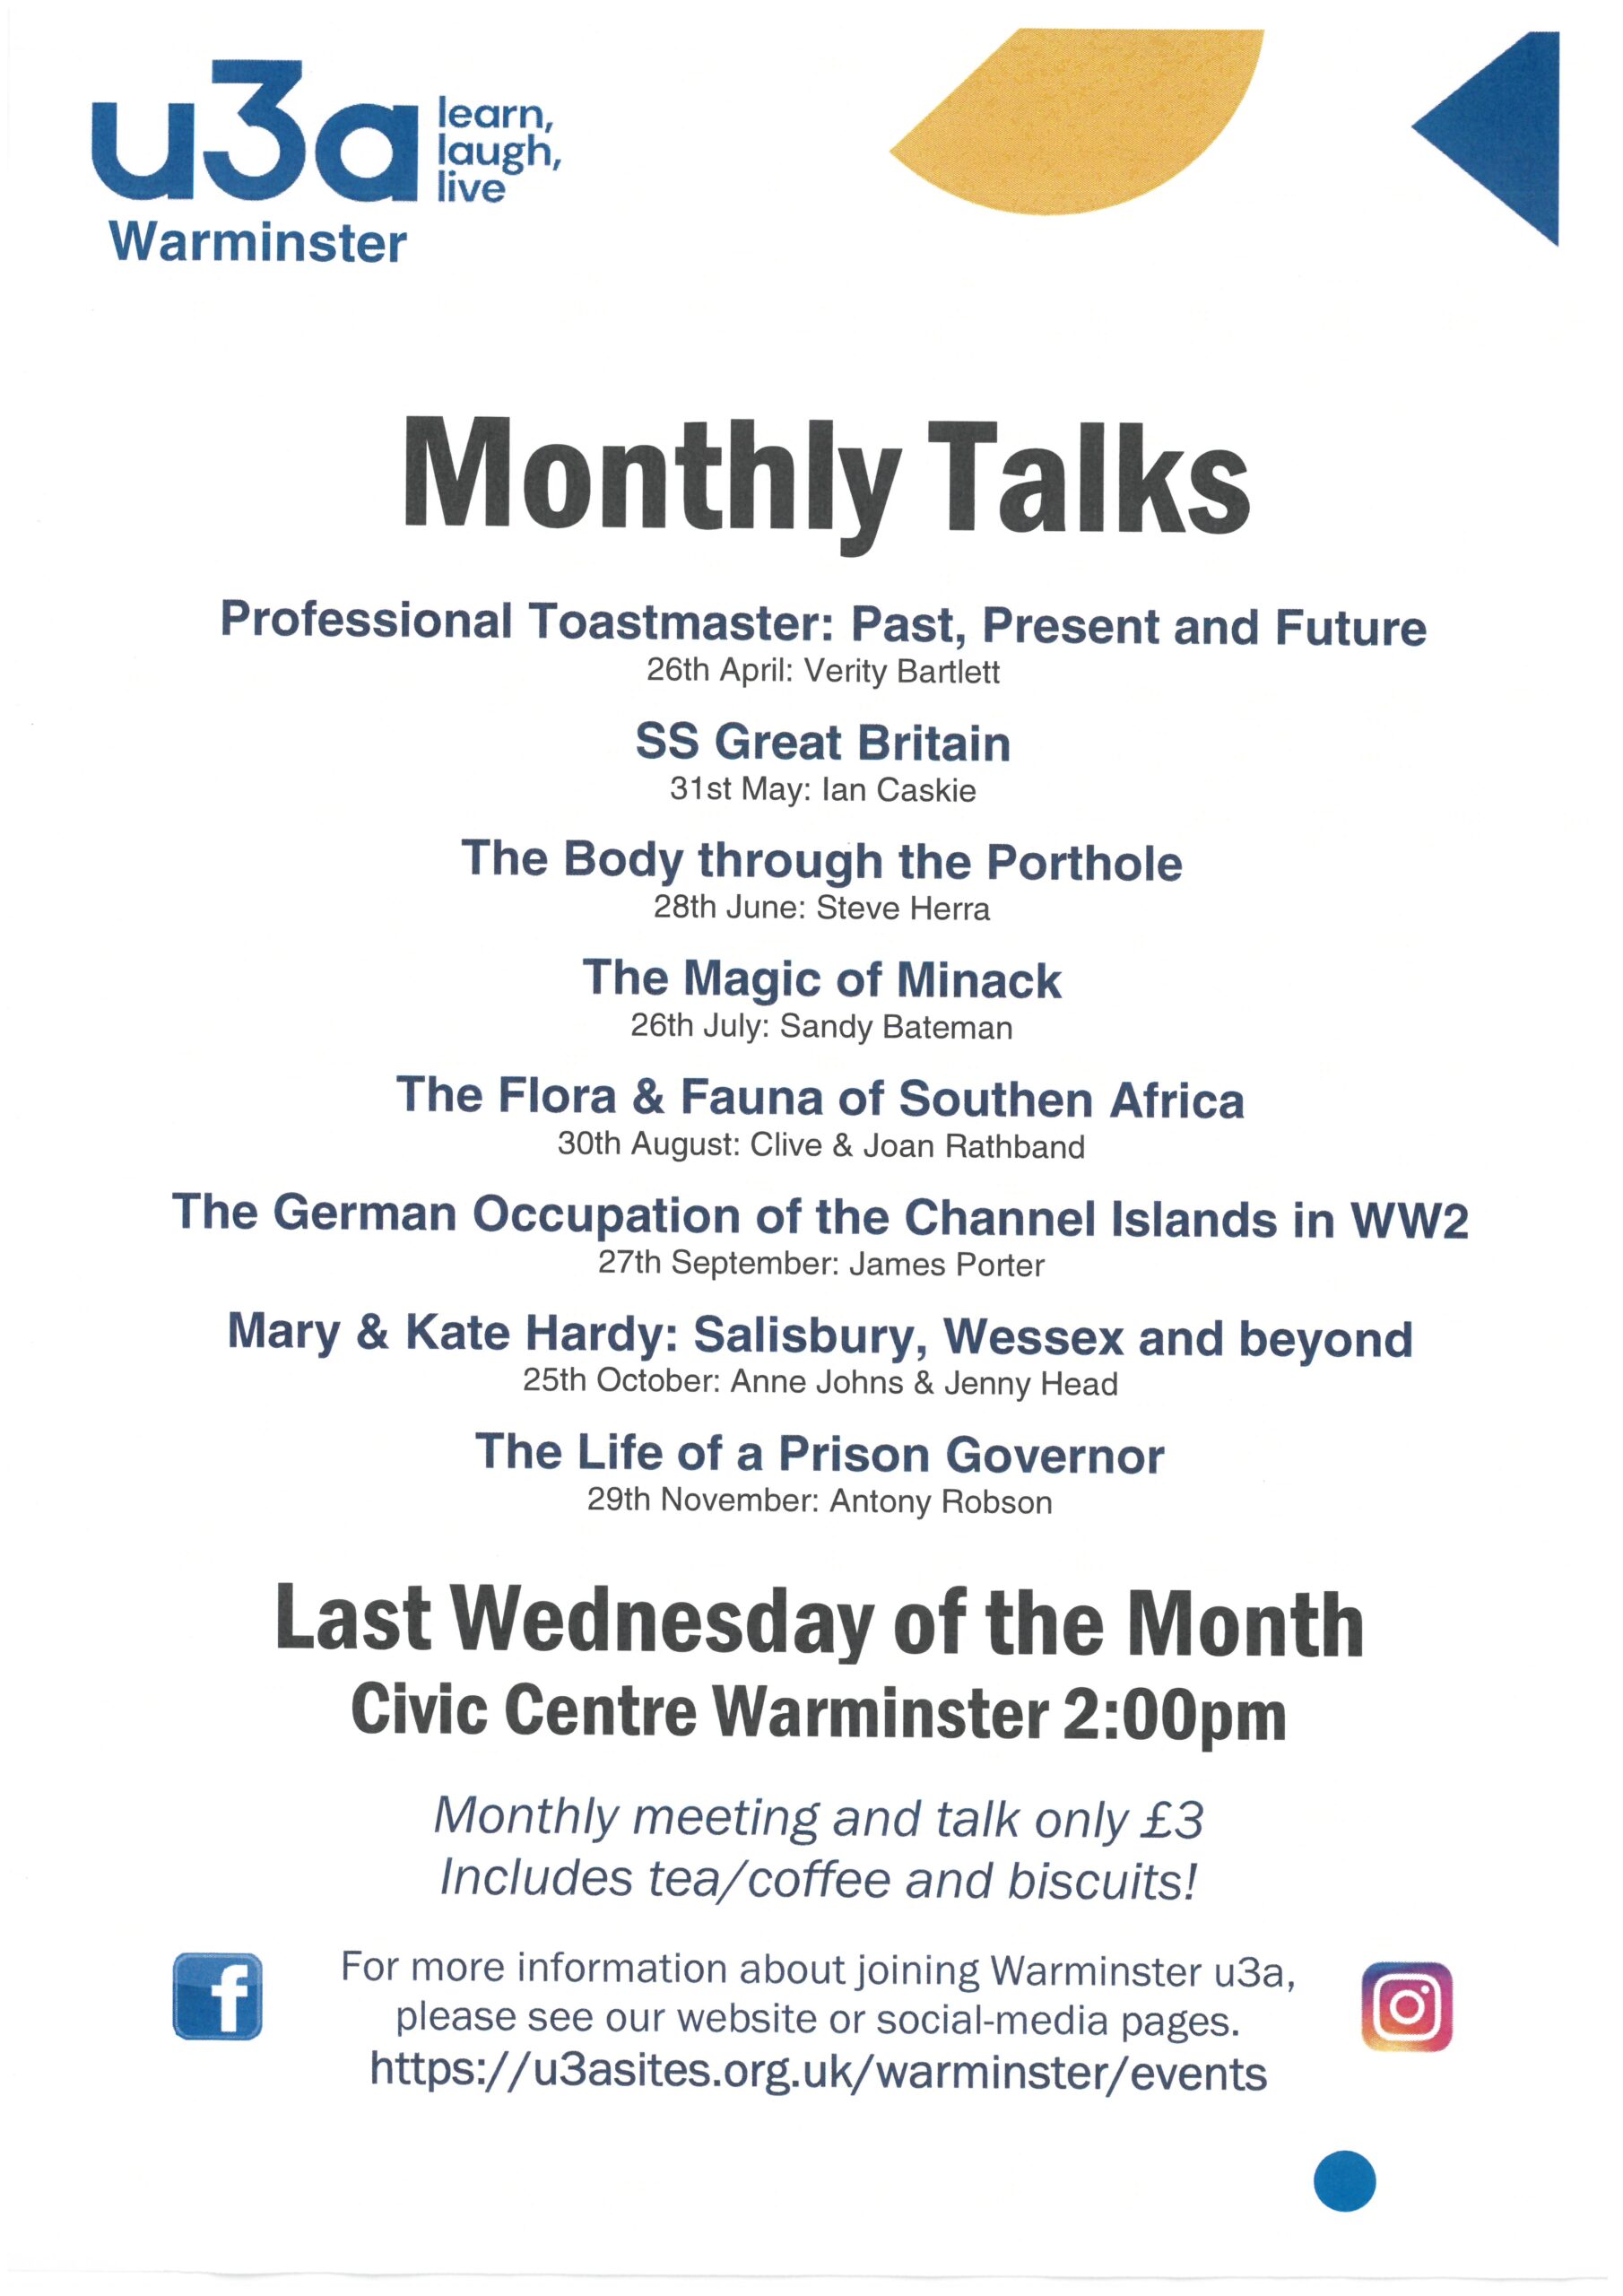 Warminster U3A Monthly Talk - Mary & Kate Hardy: Salisbury, Wessex and Beyond by Anne Johns & Jenny Head